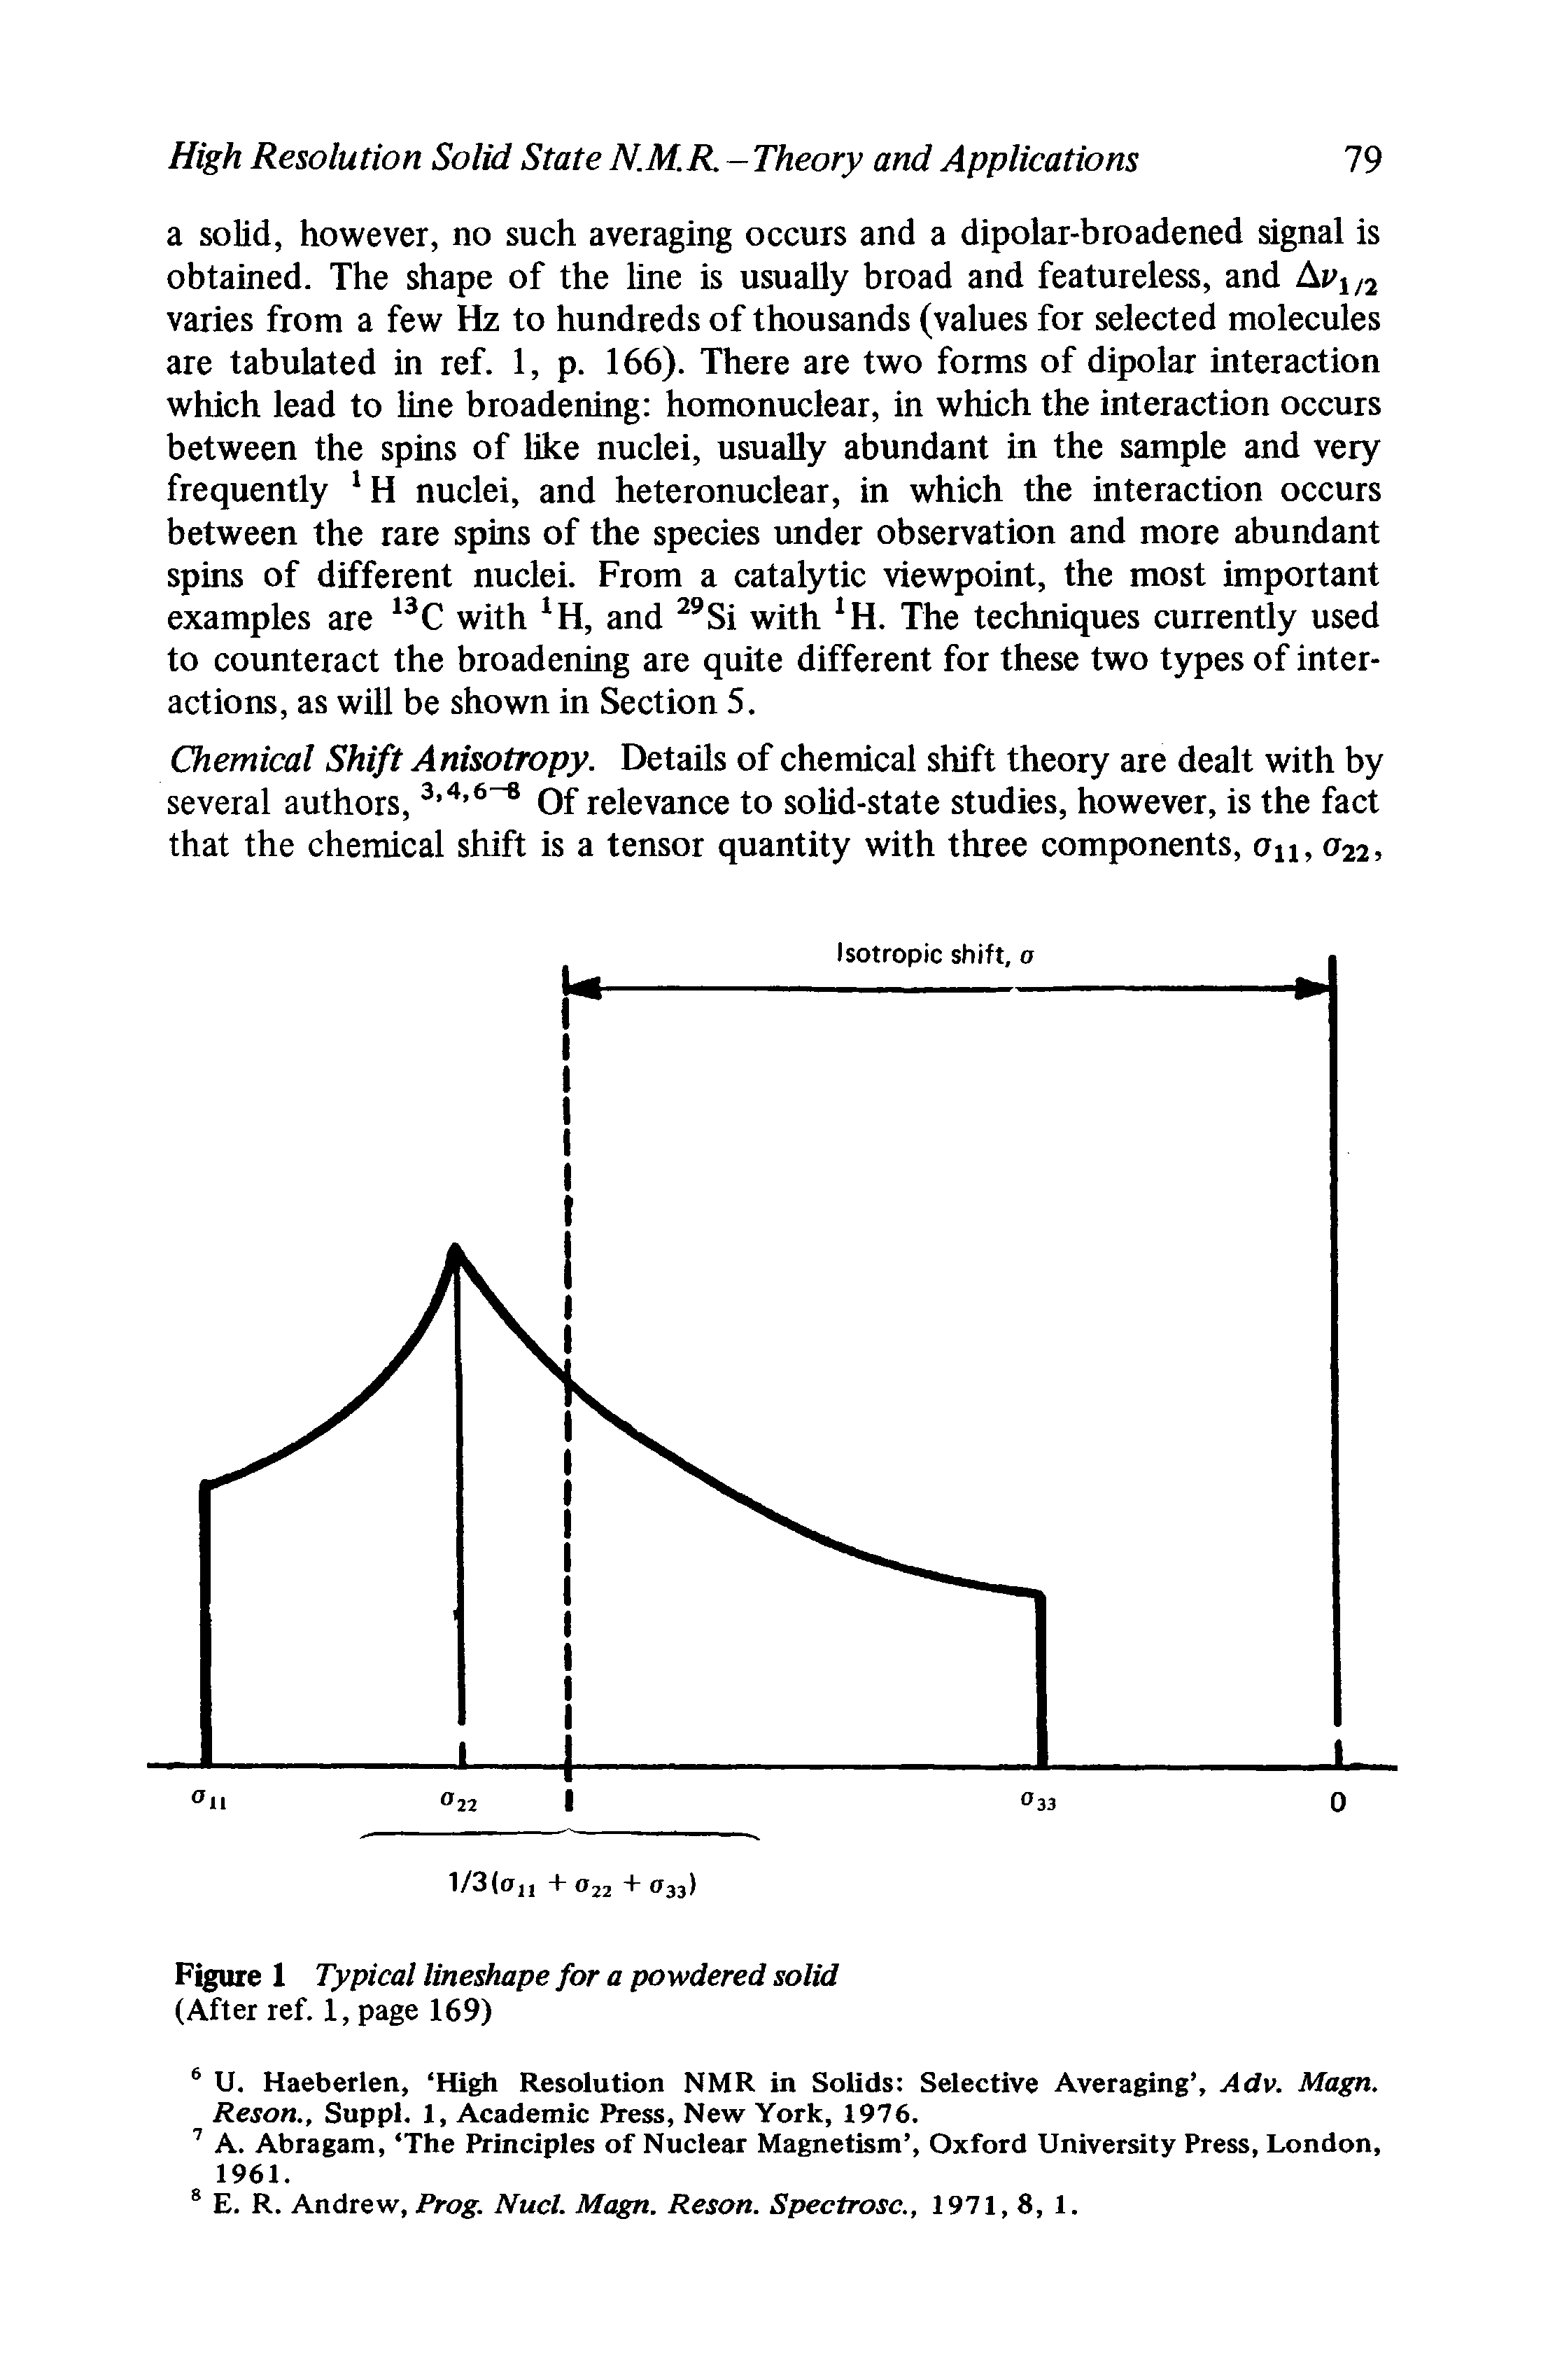 Figure 1 Typical lineshape for a powdered solid (After ref. 1, page 169)...